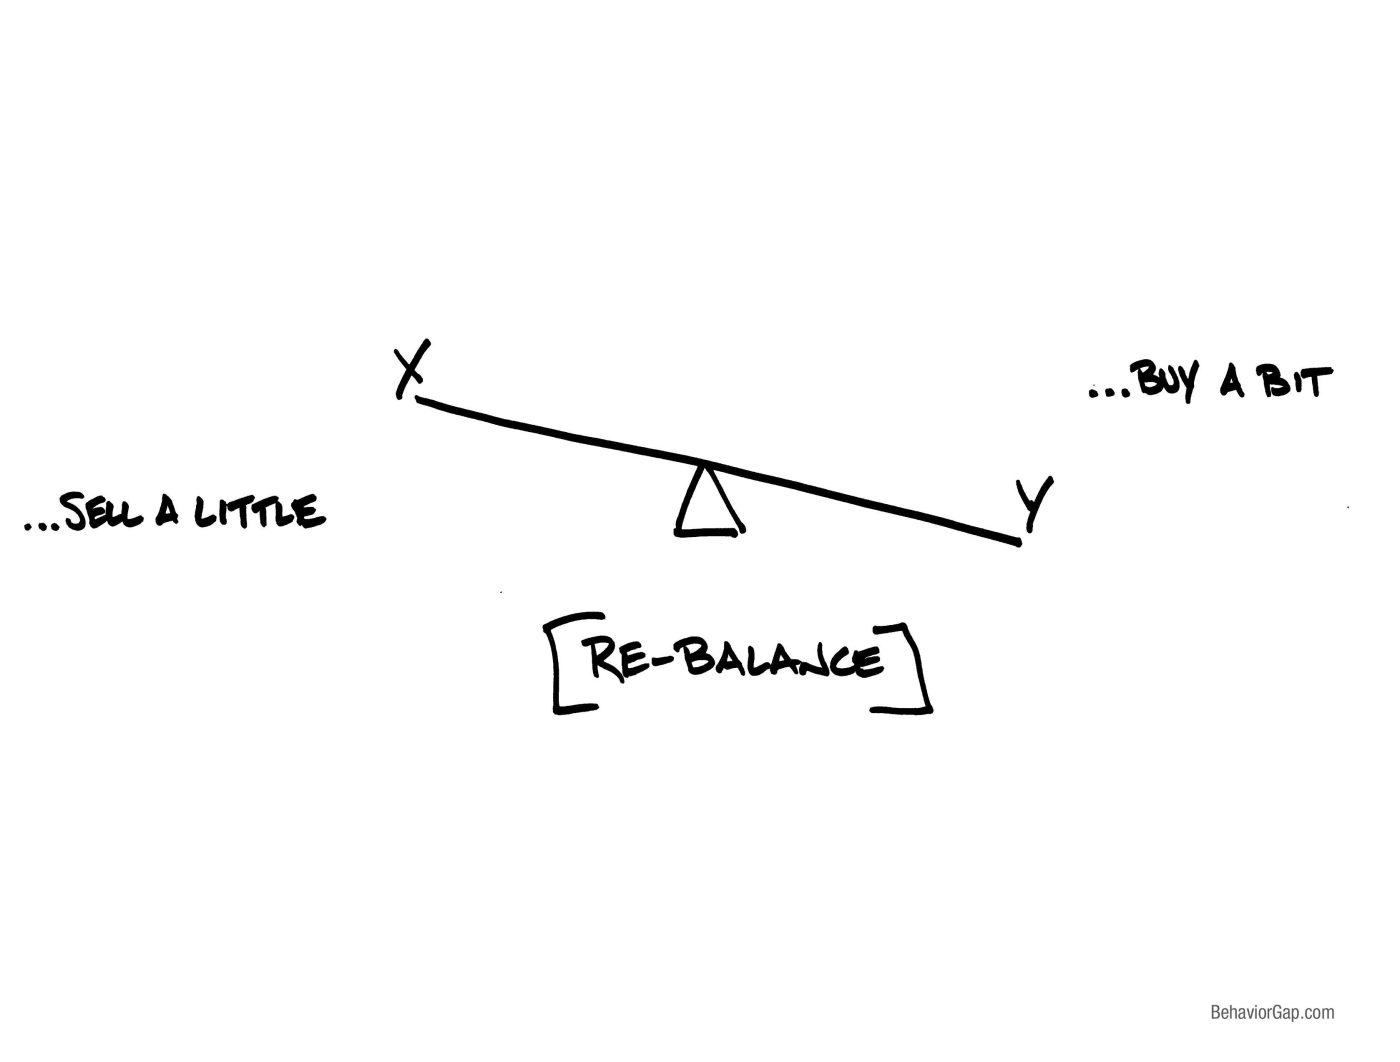 How to Make Rebalancing Valuable to You